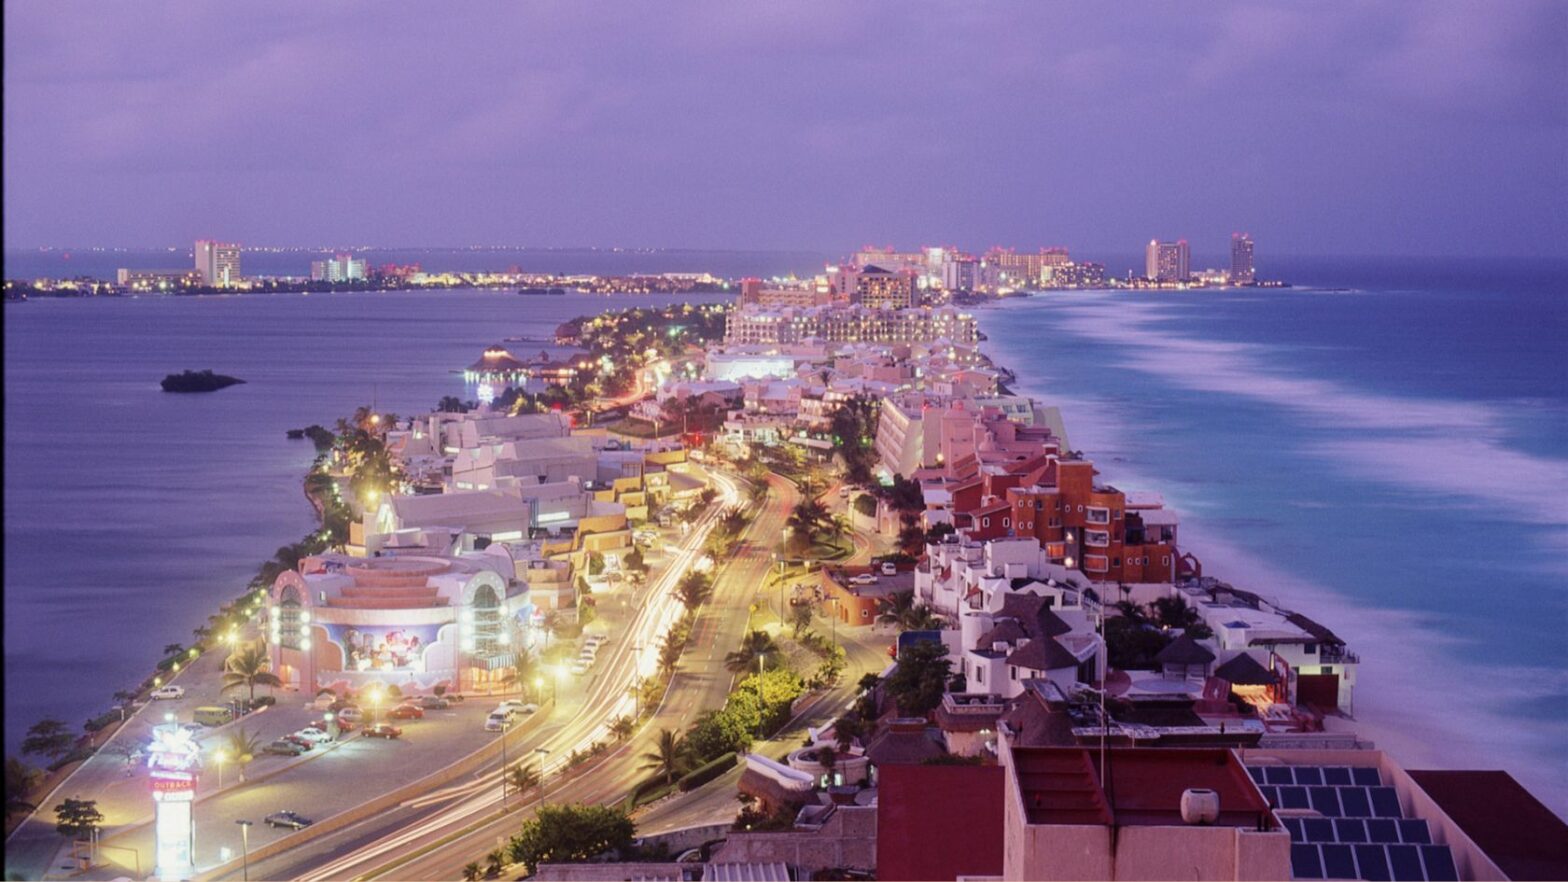 Cancun Mexico strip at sunset - Mexico security measures increasing